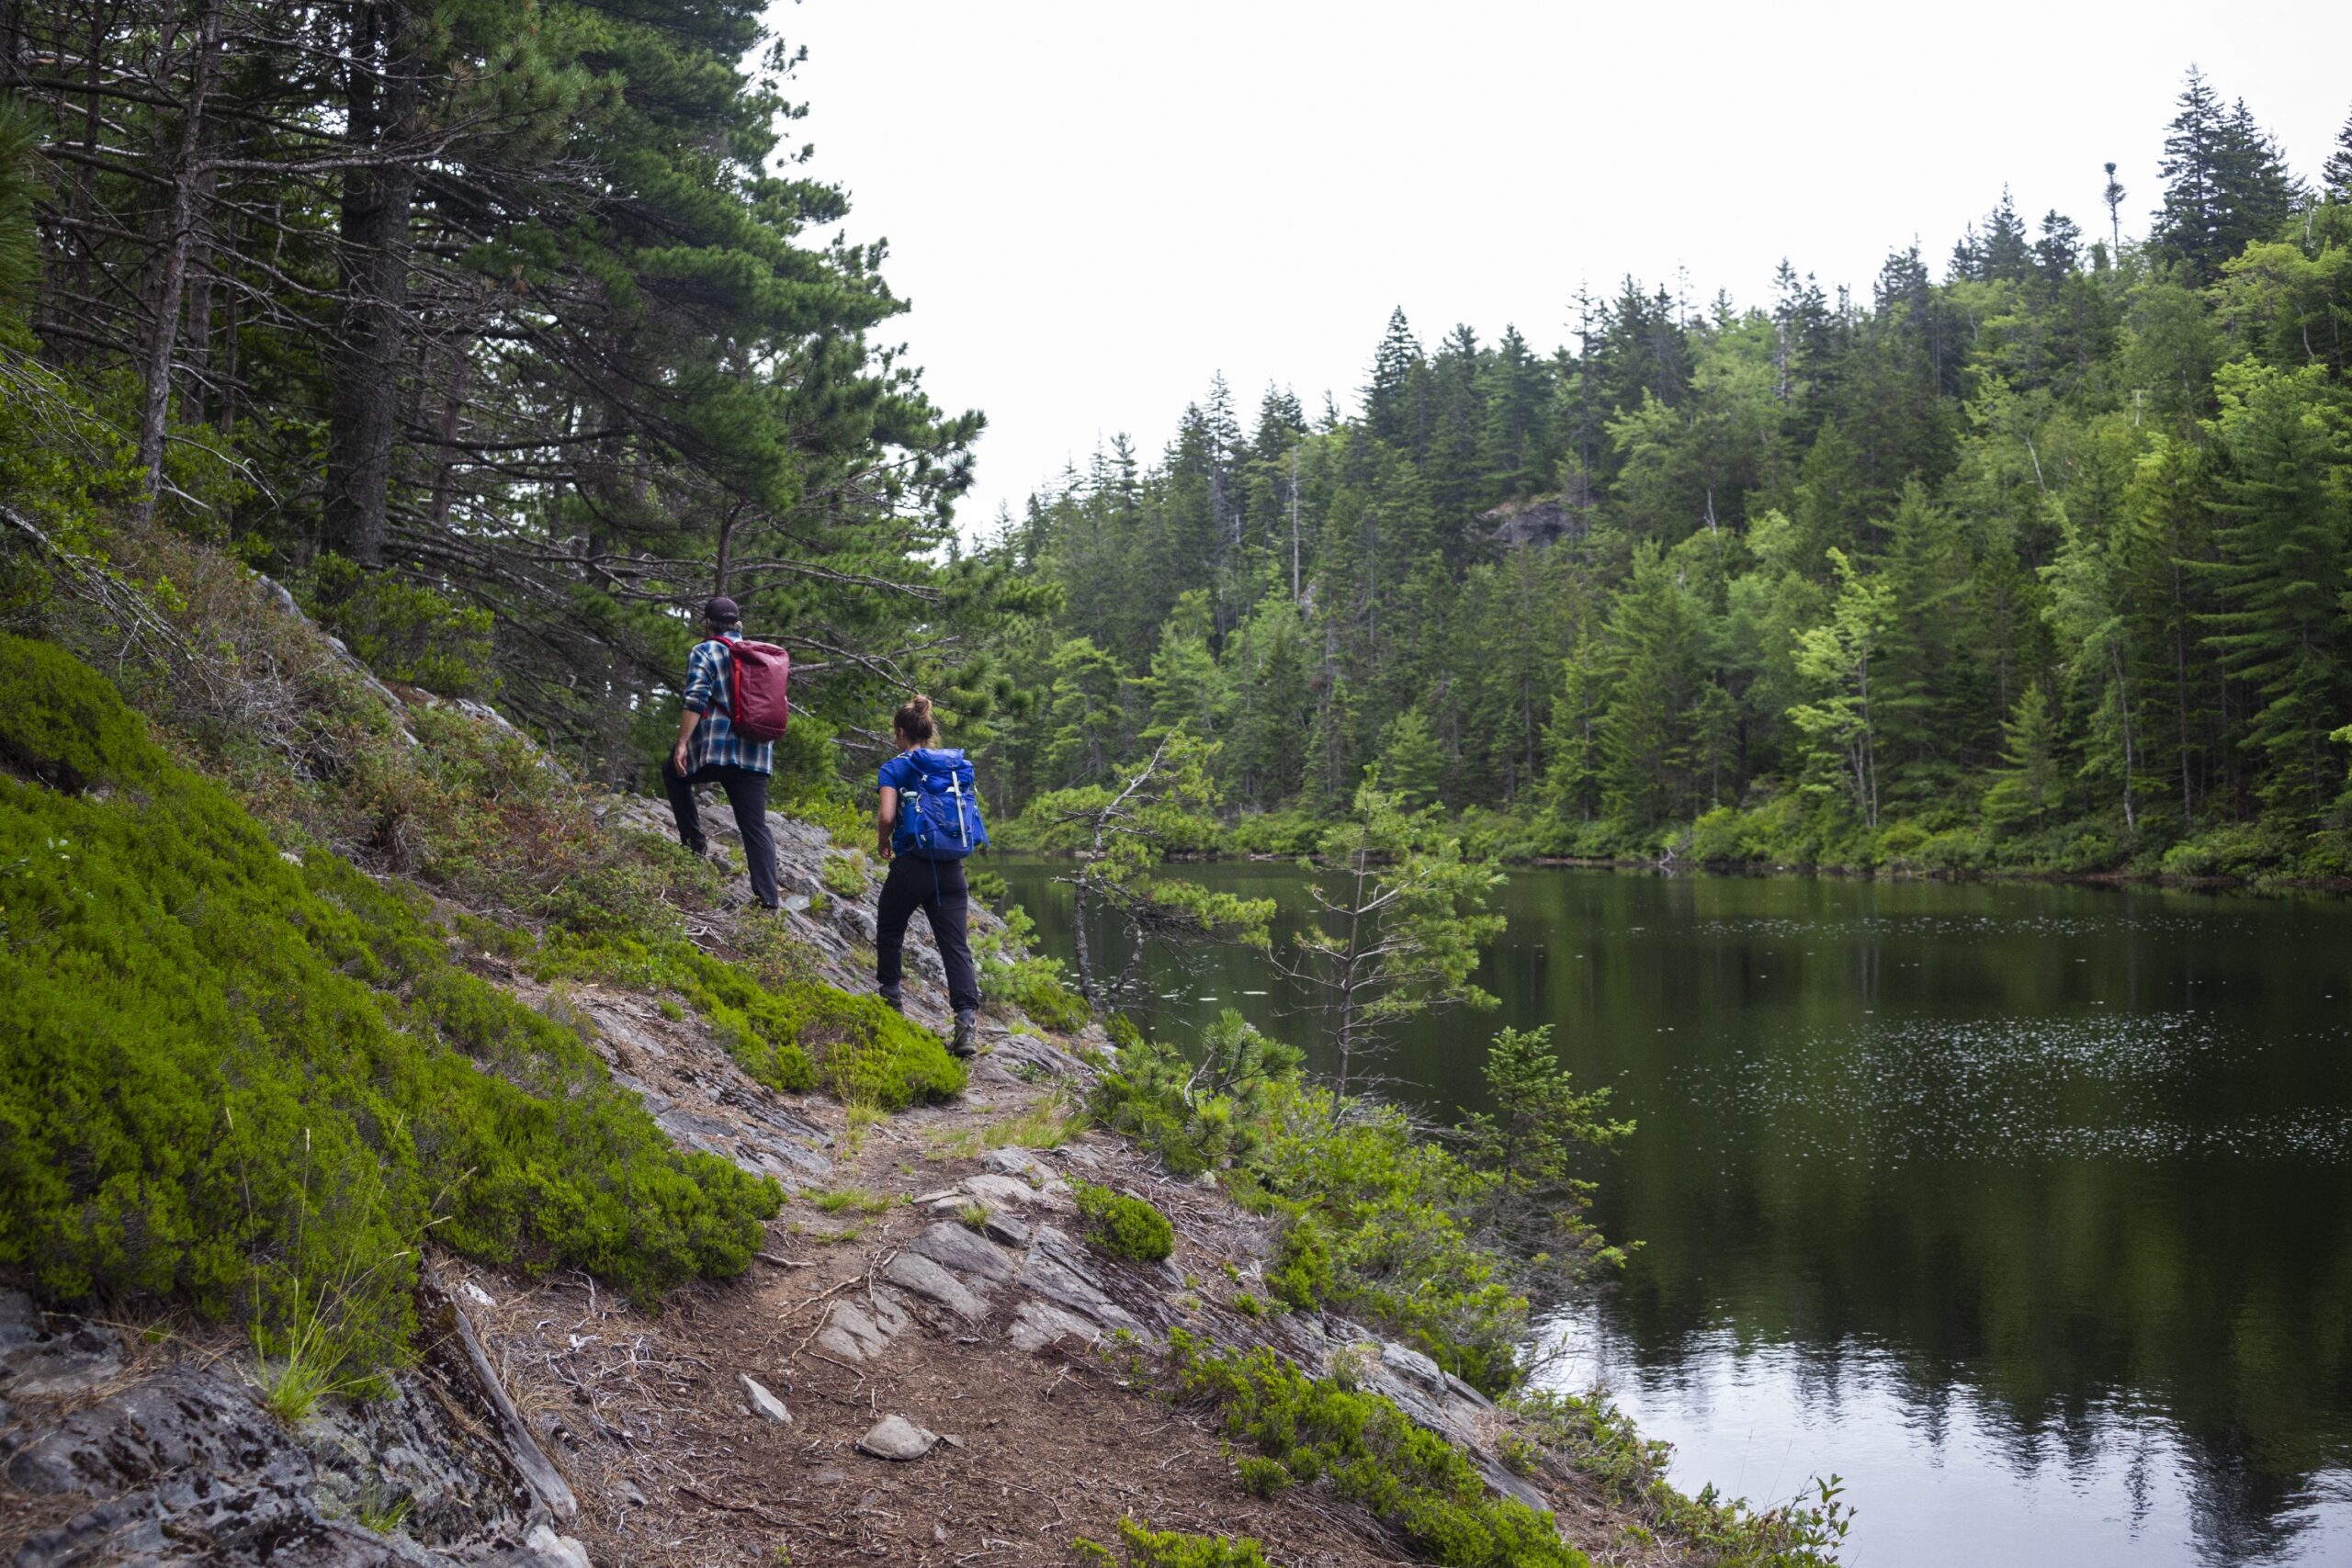 Two people hike along a lake. On the right is a woman with a blue backpack, and on the left, in front, is a man with a red backpack. It's an overcast day, and along the shores of the lake there are evergreen trees and steep hills.